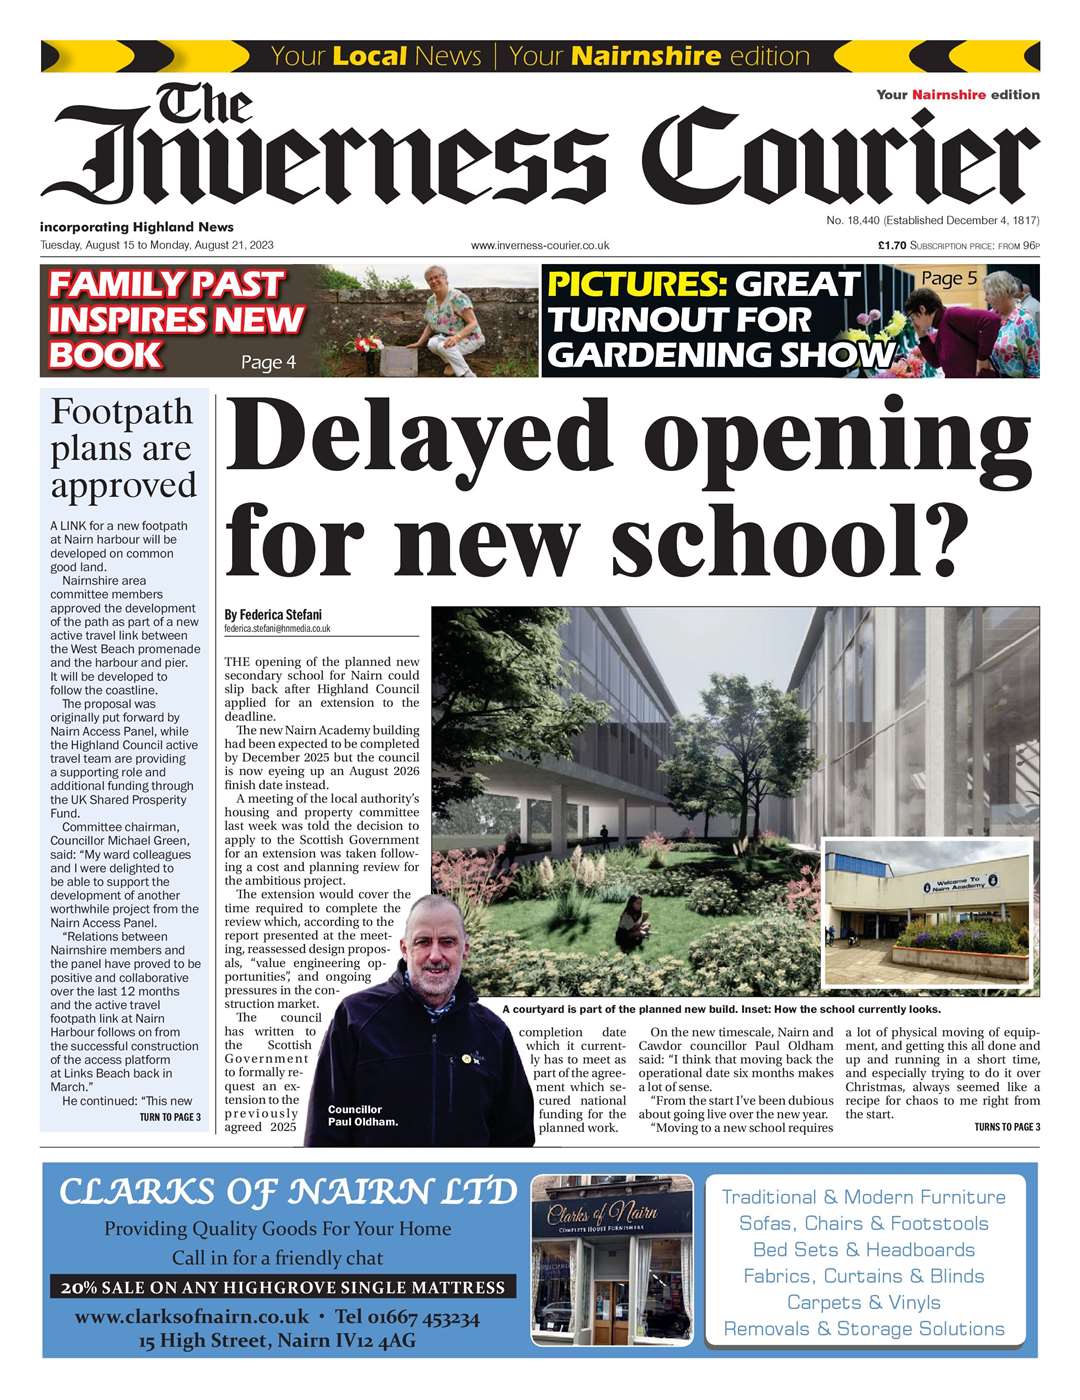 The Inverness Courier (Nairnshire edition), August 15, front page.